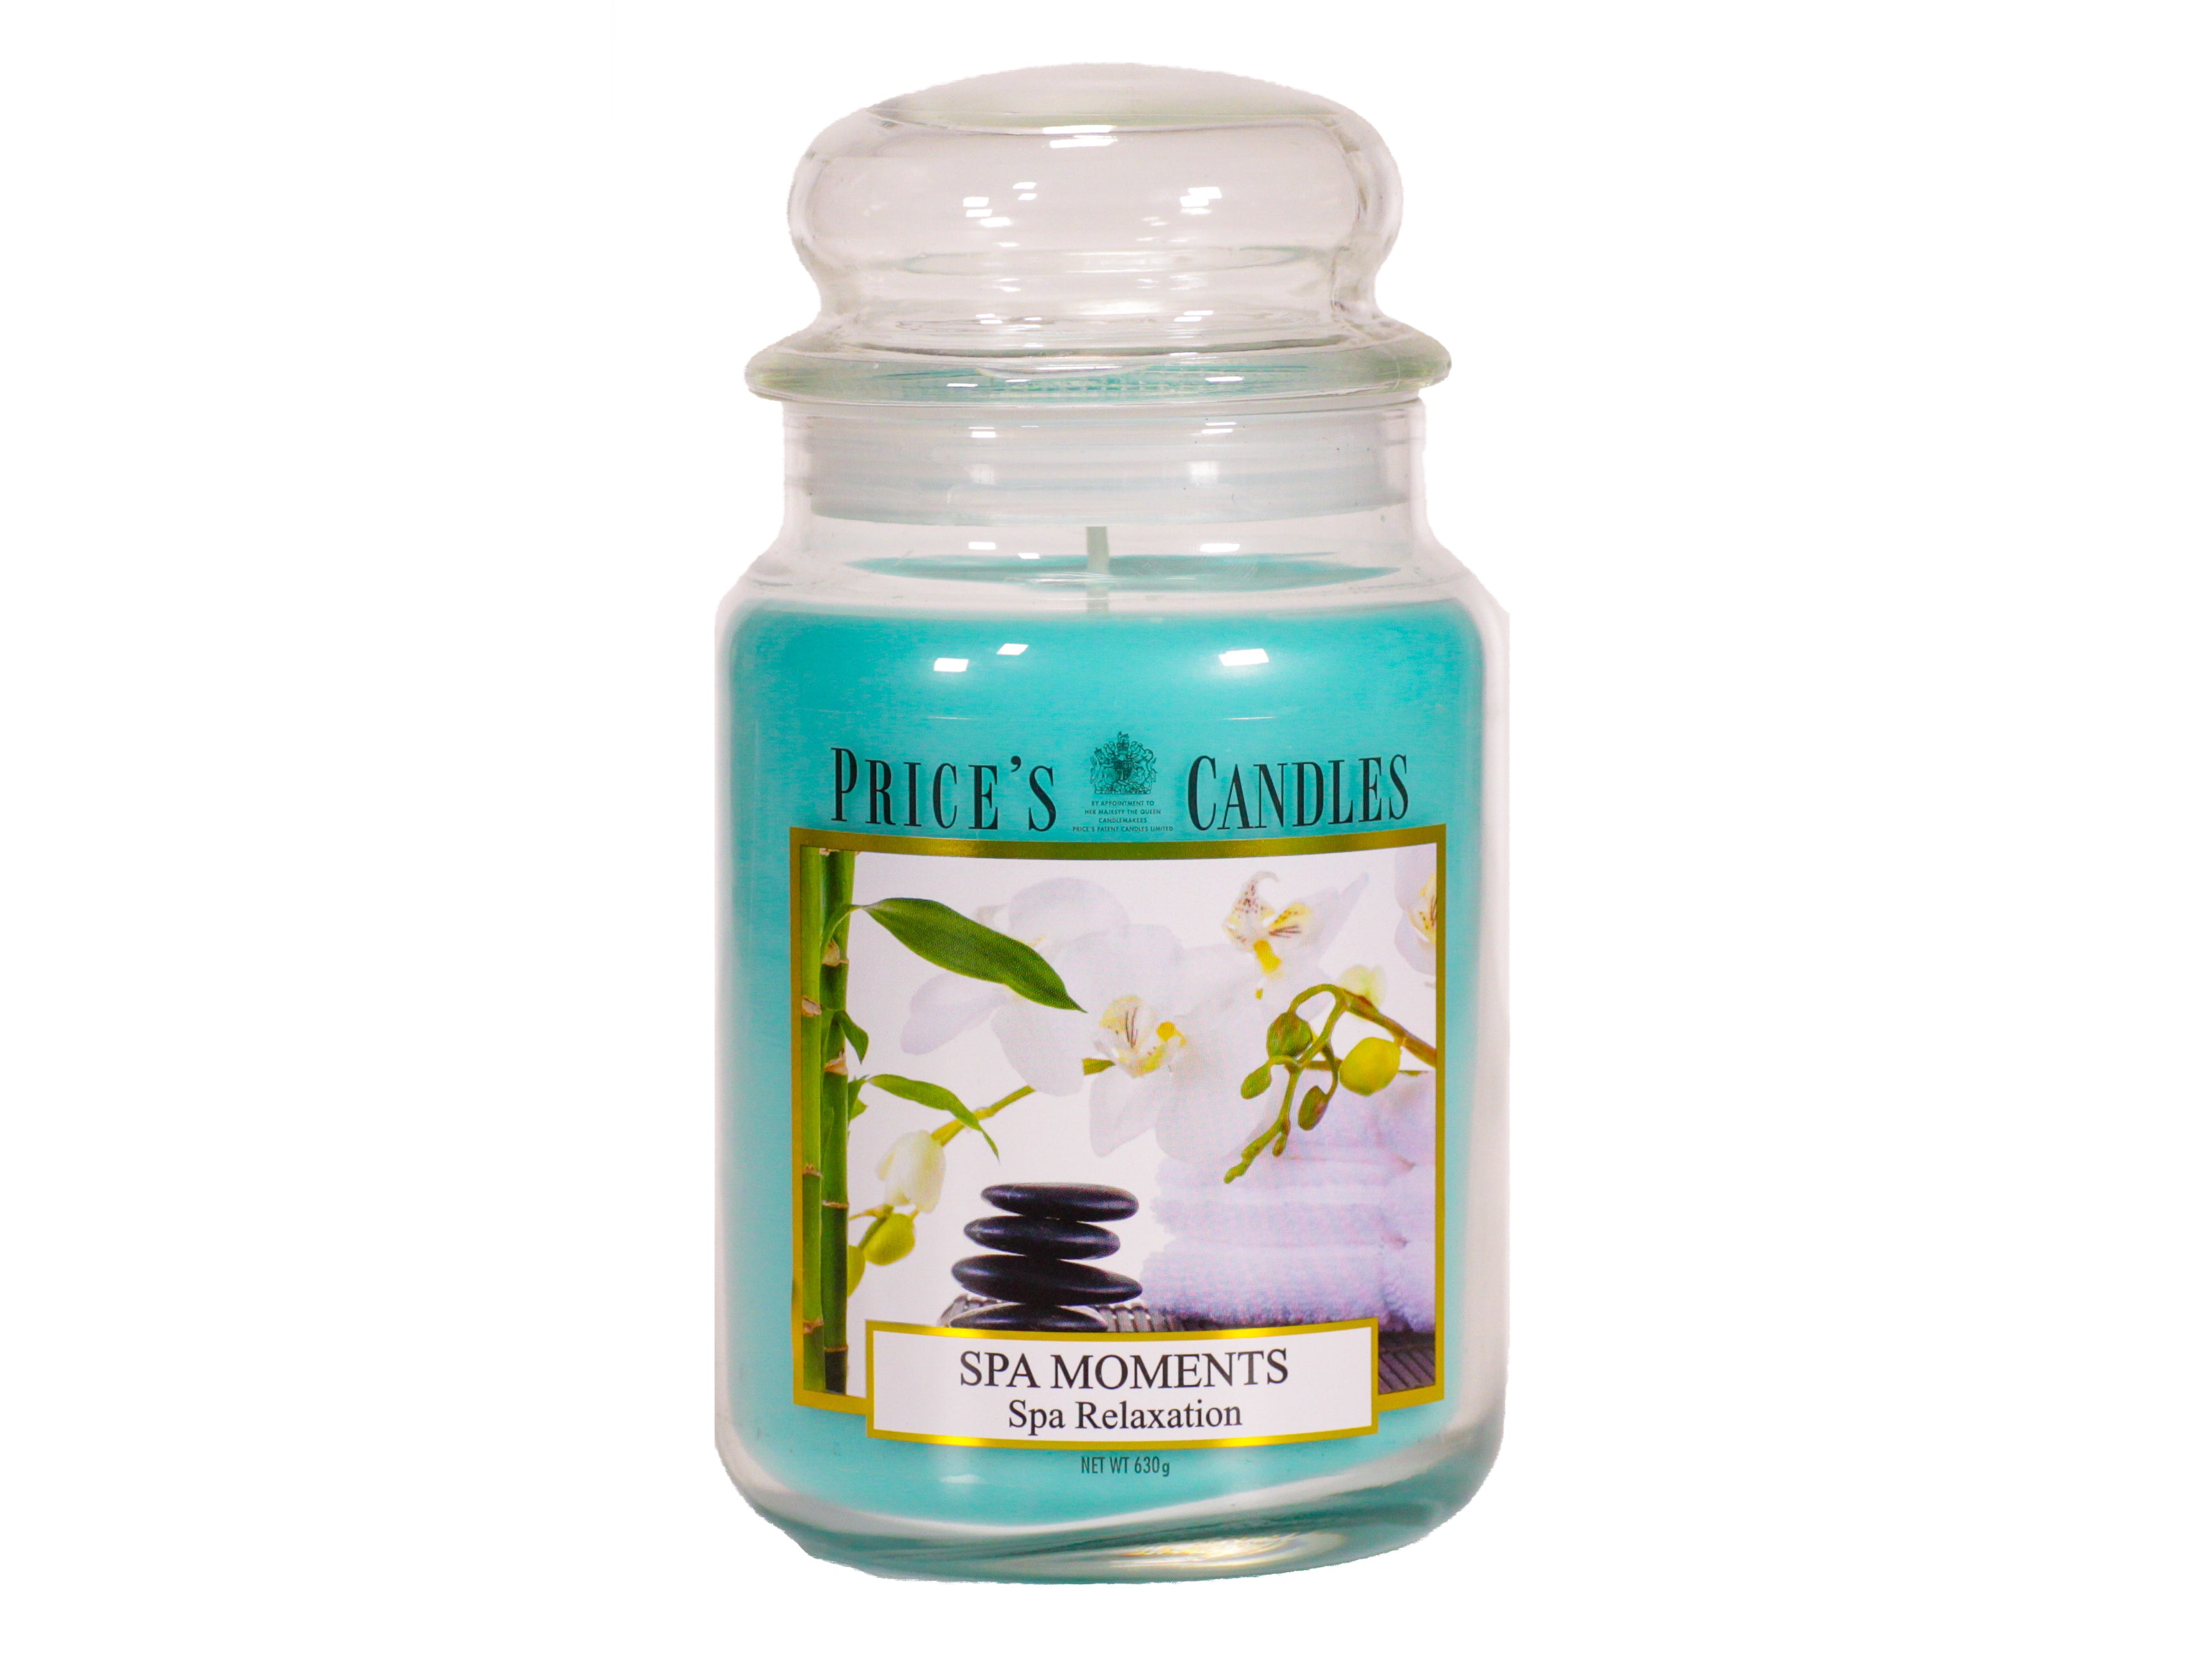 Prices Candles Duftkerze „Spa Moments“ 630g